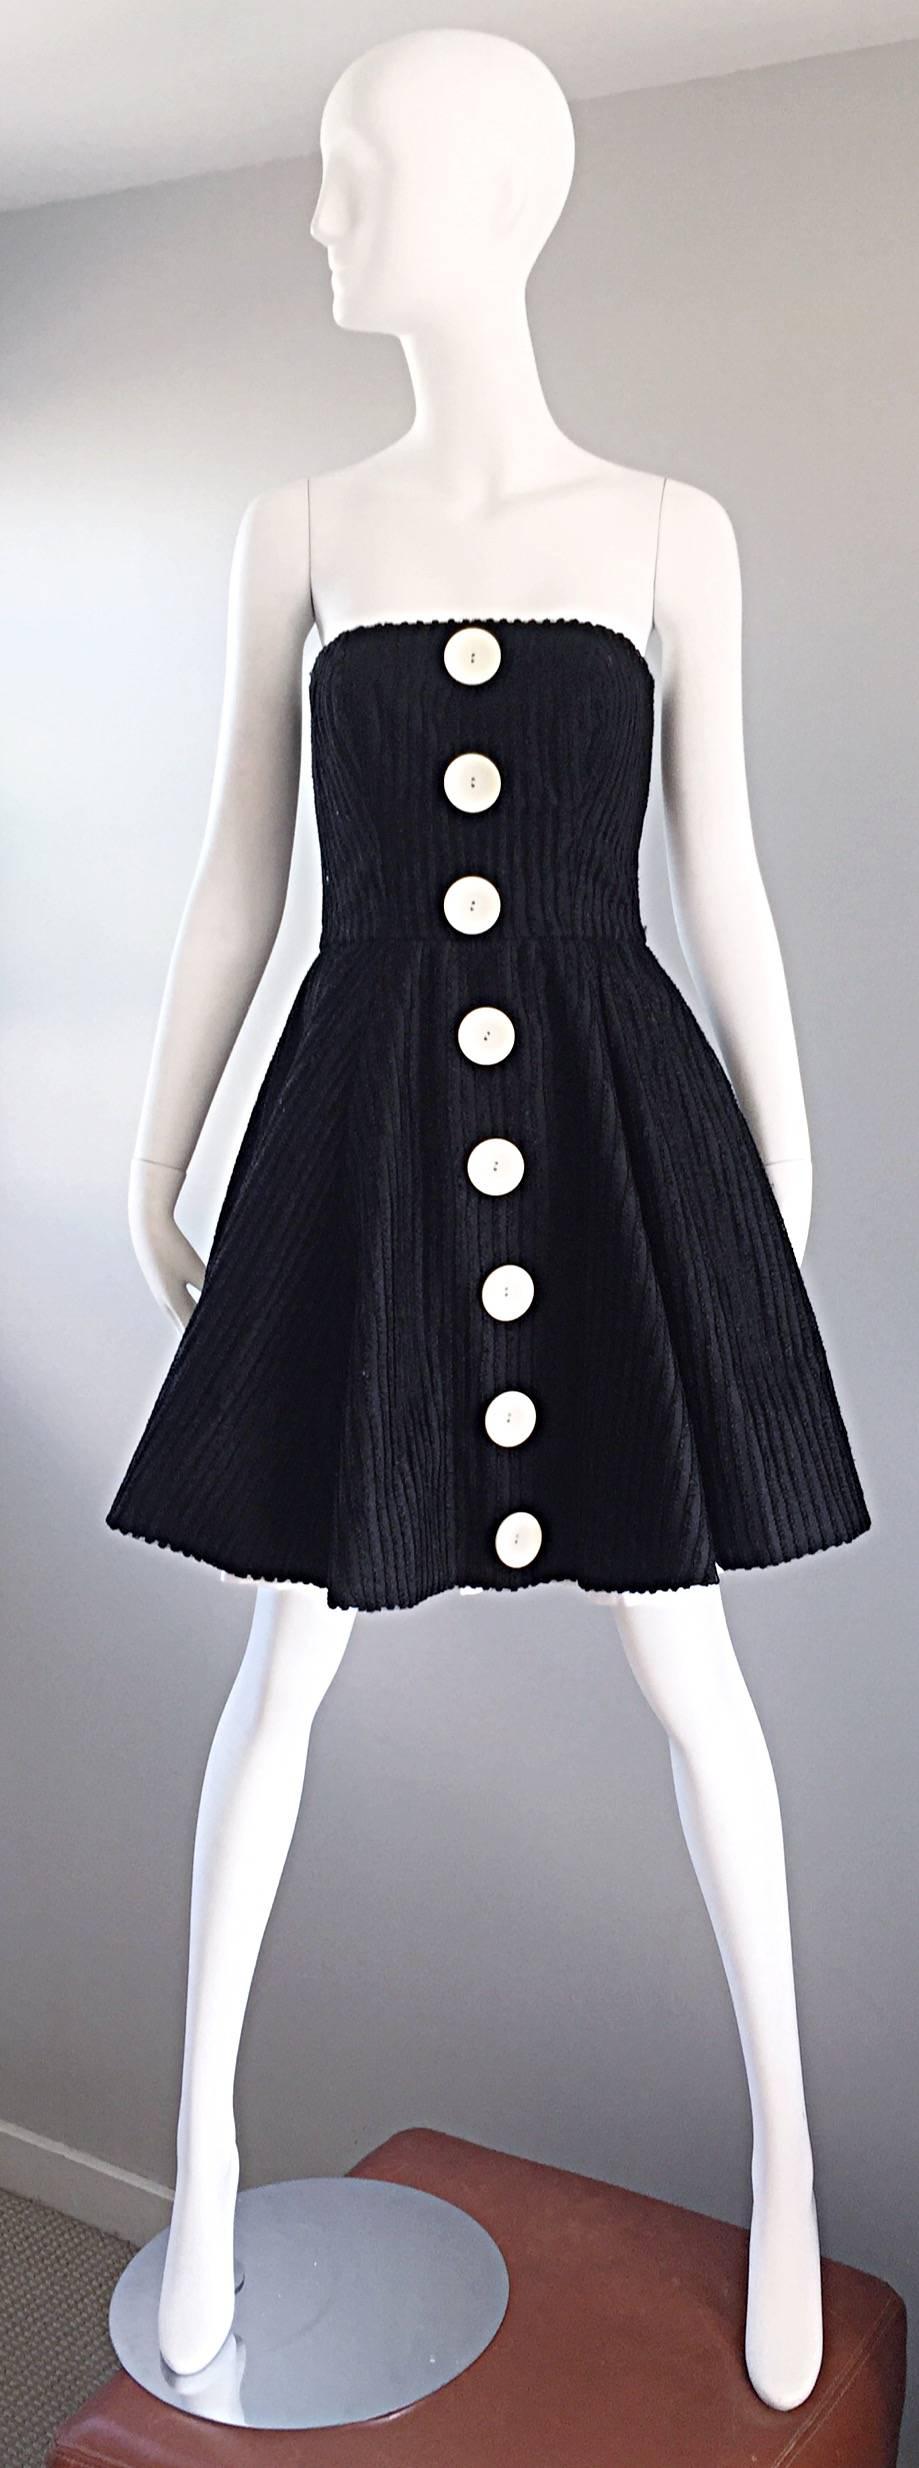 Vintage Christian Lacroix Black and White Fit n' Flare Strapless Button Dress  For Sale 2